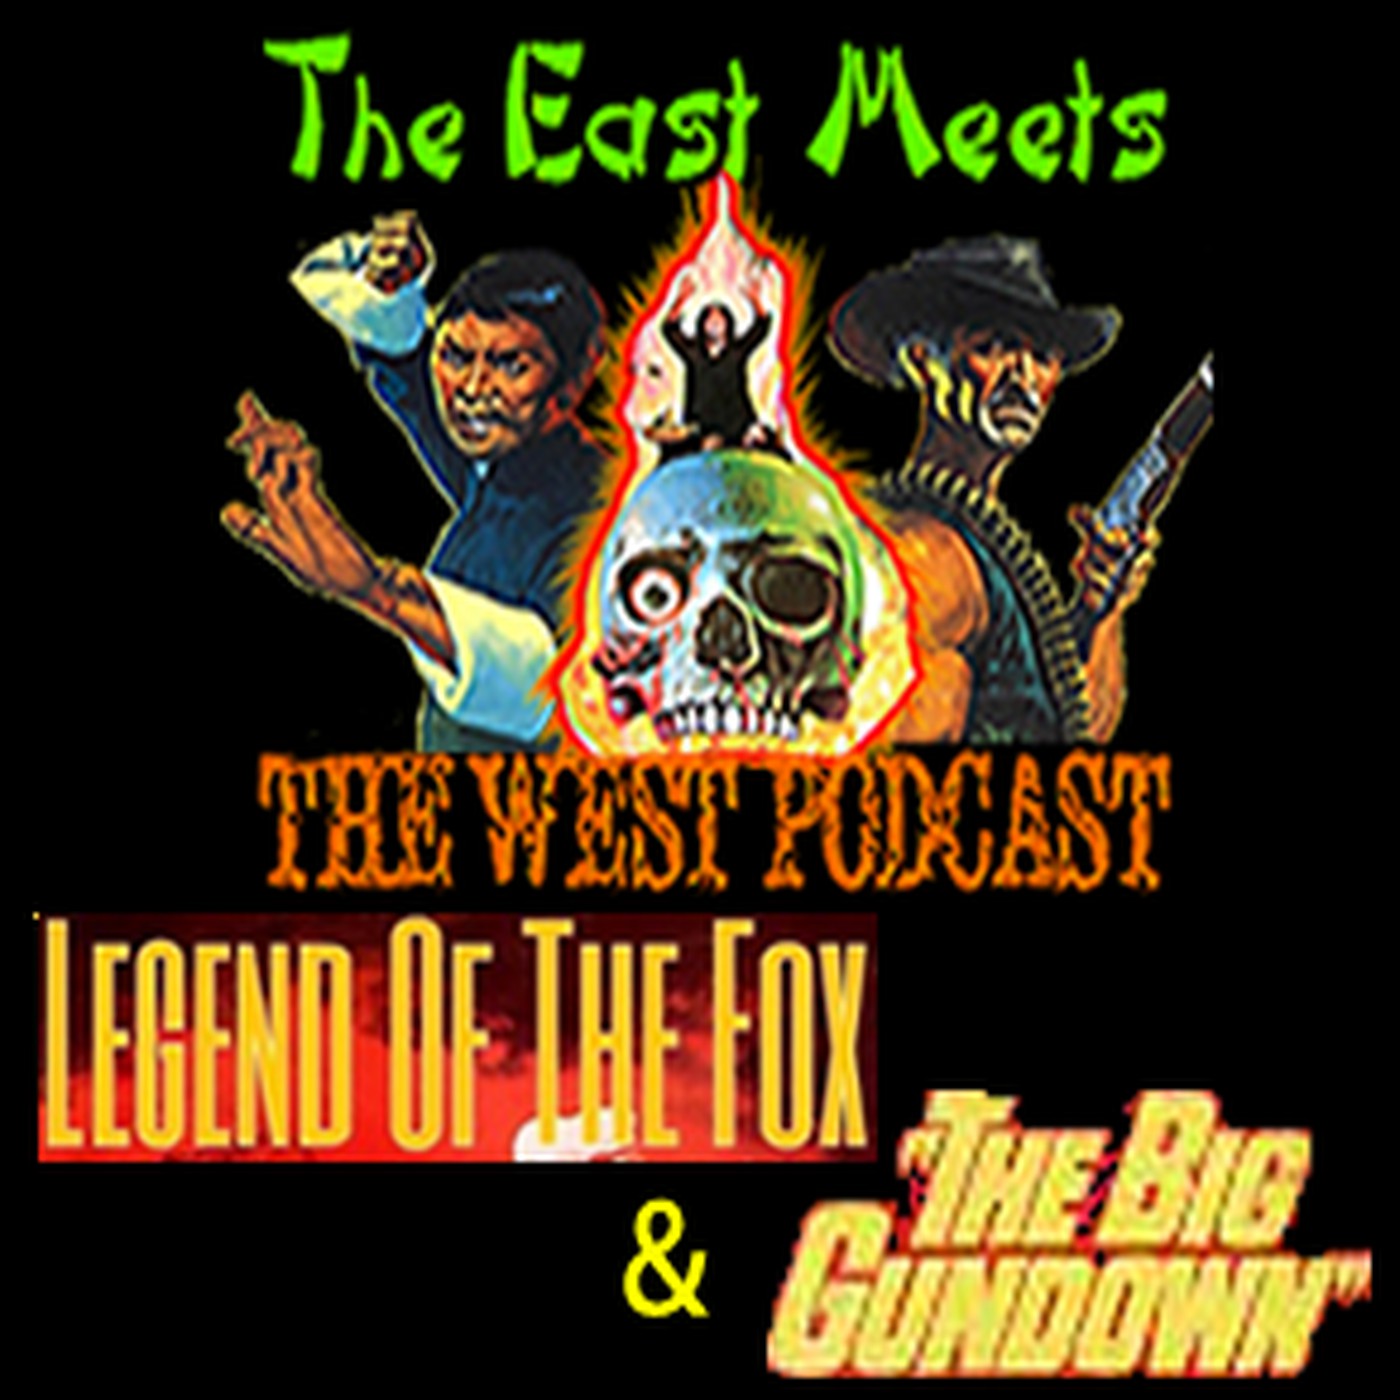 The East Meets the West Ep. 17 - LEGEND OF THE FOX (1980) & THE BIG GUNDOWN (1966)